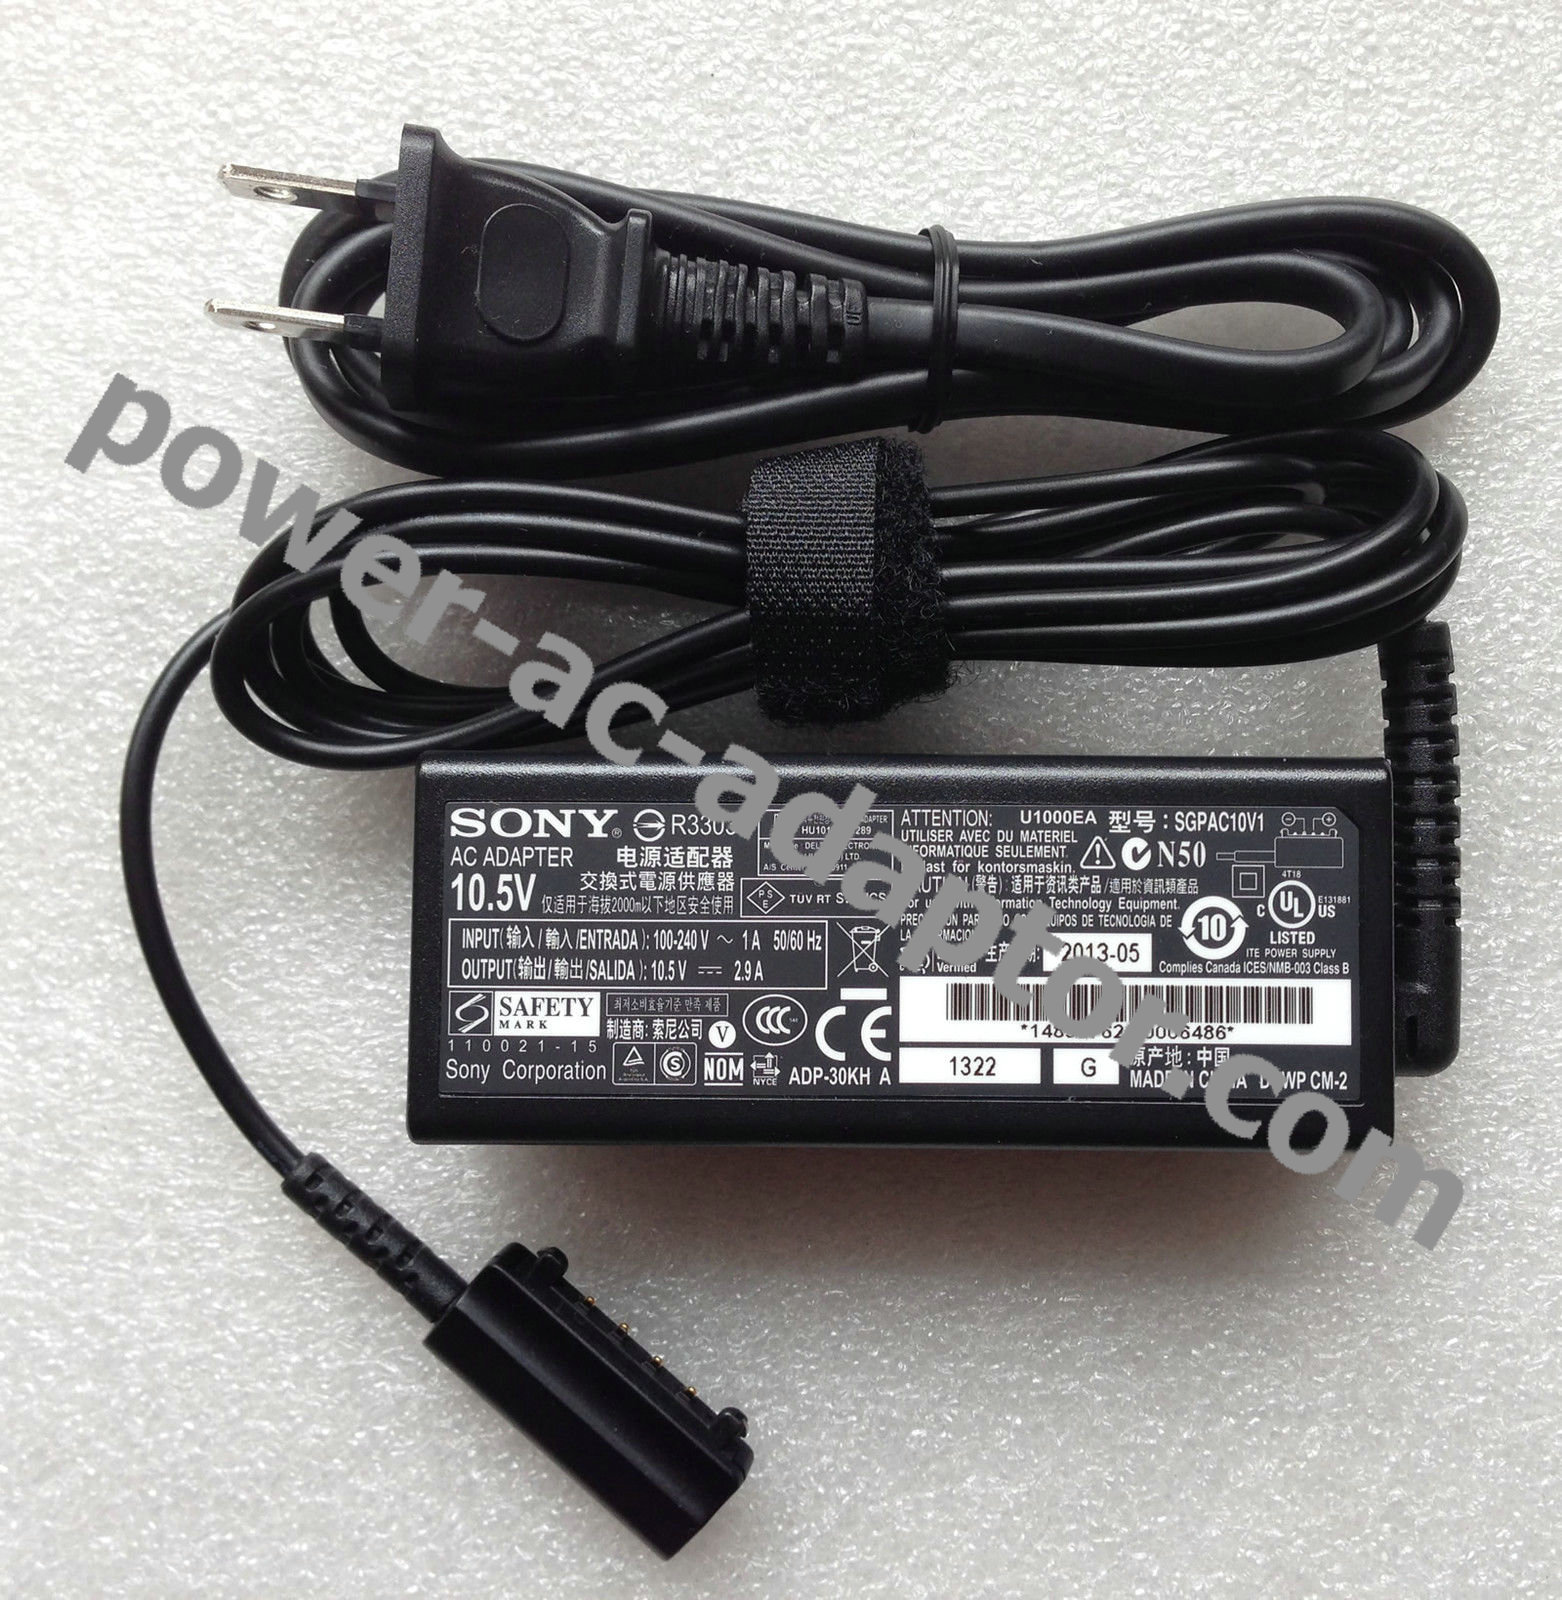 Genuine Sony Xperia Tablet S SGPT11 SGPAC10V1 AC Adapter Cord